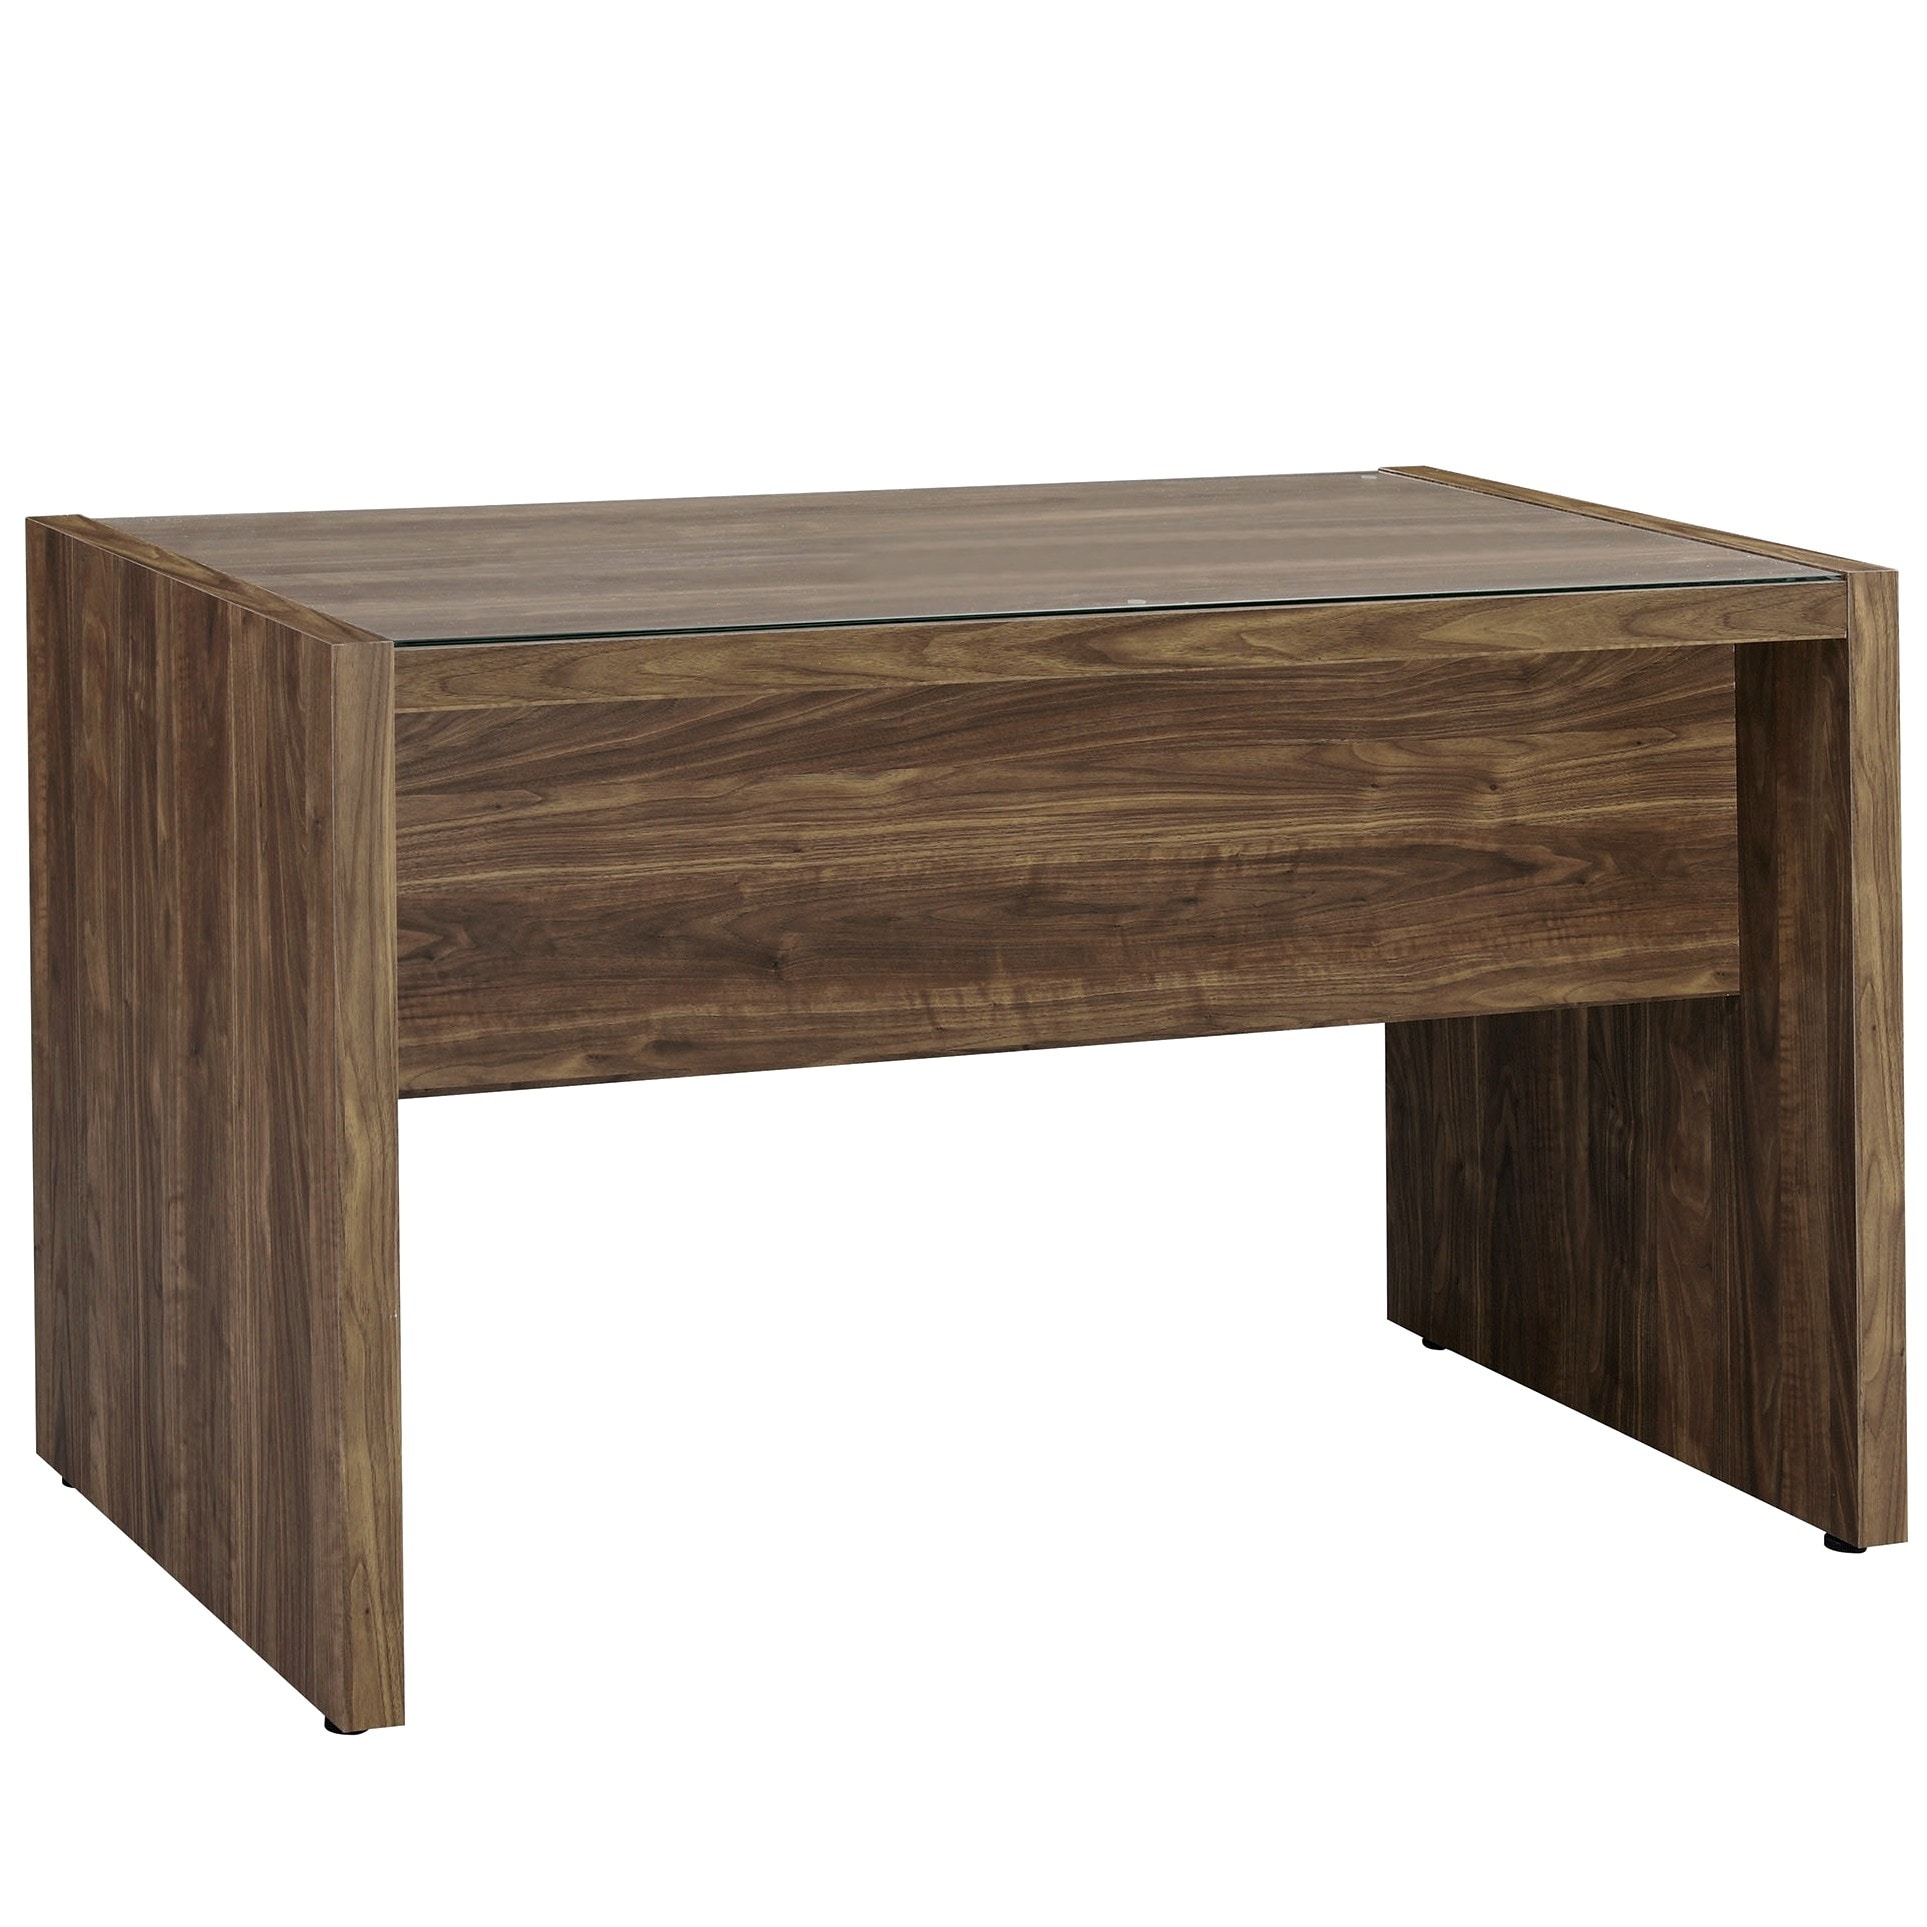 https://ak1.ostkcdn.com/images/products/is/images/direct/e4f35e623a658a362192932c67521a9af5209cd9/Modern-Aged-Walnut-Finish-Home-Office-Desk-With-Glass-Top-Cover.jpg